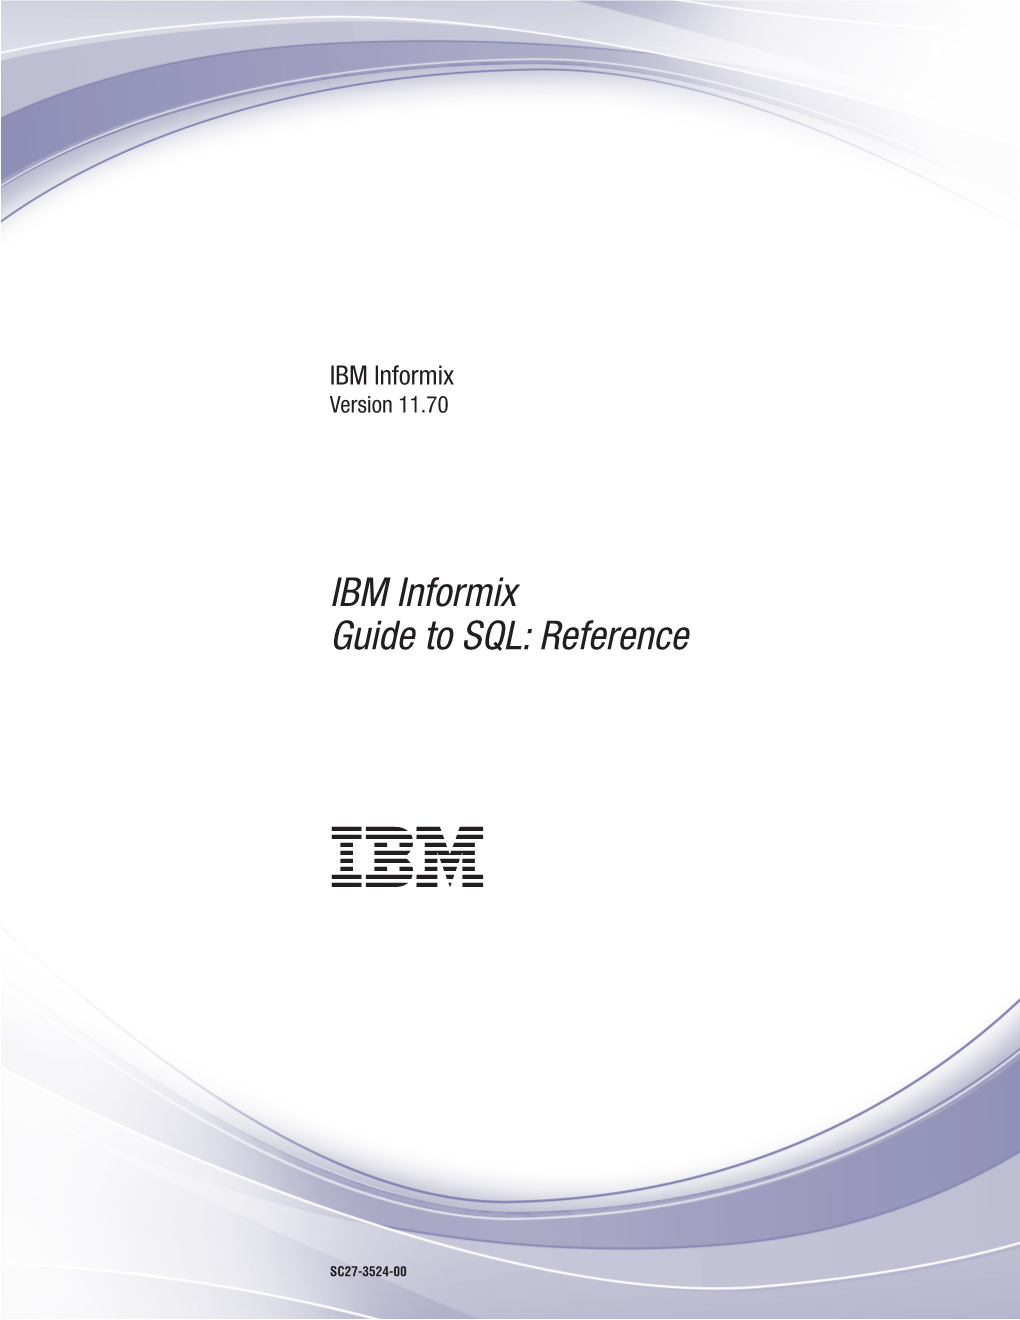 IBM Informix Guide to SQL: Reference